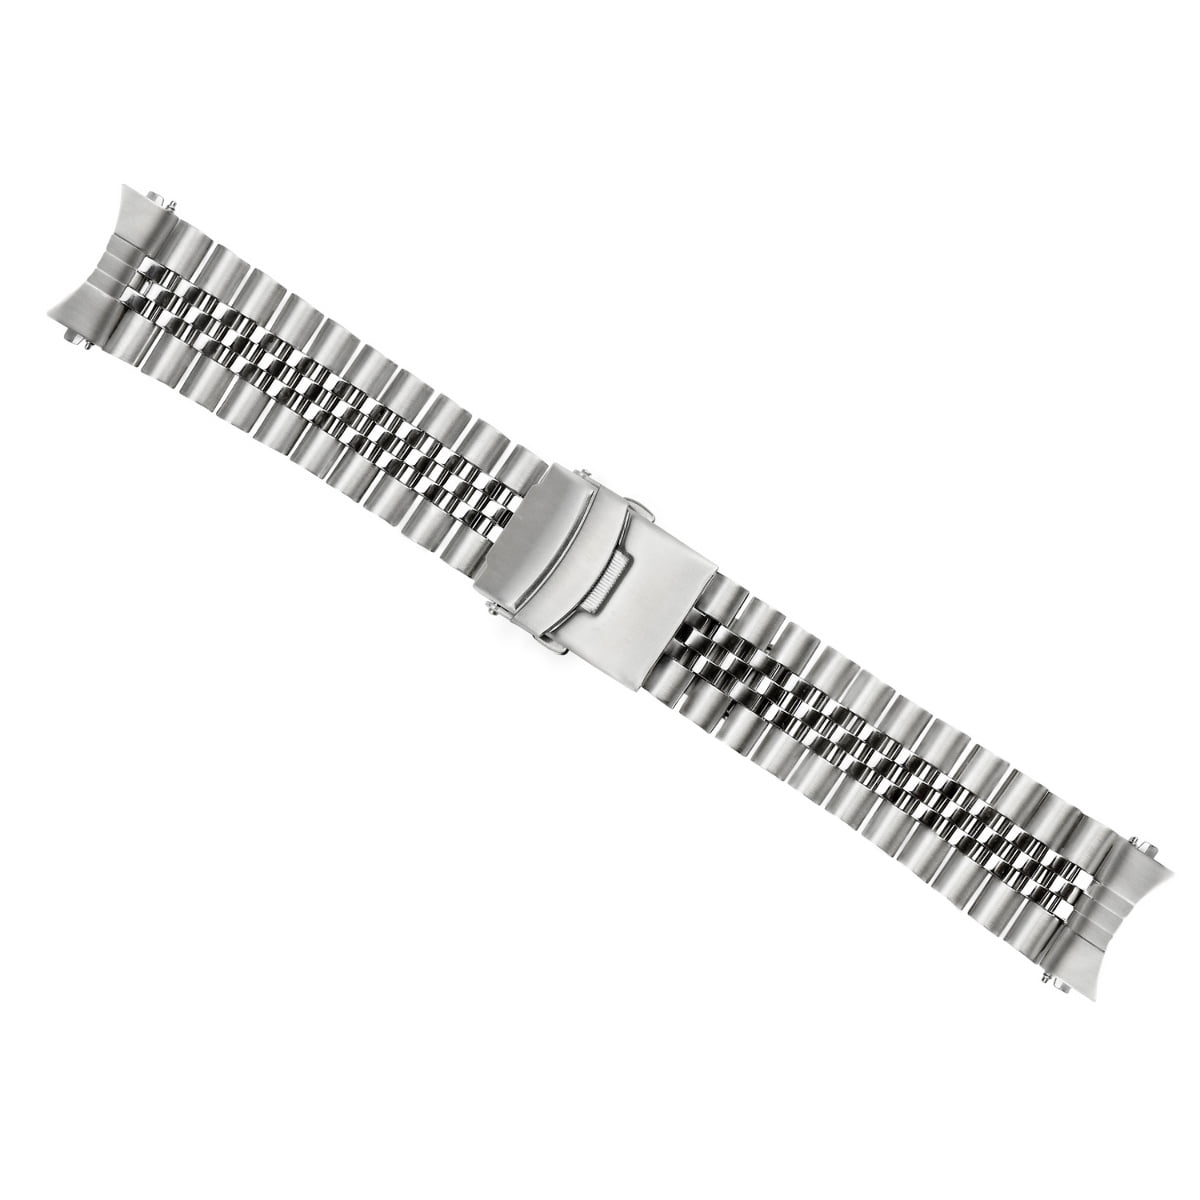 20MM JUBILEE WATCH BAND FOR SEIKO SKX013 SKX015 SK031 SKX033 7S26-0030  STAINLESS 